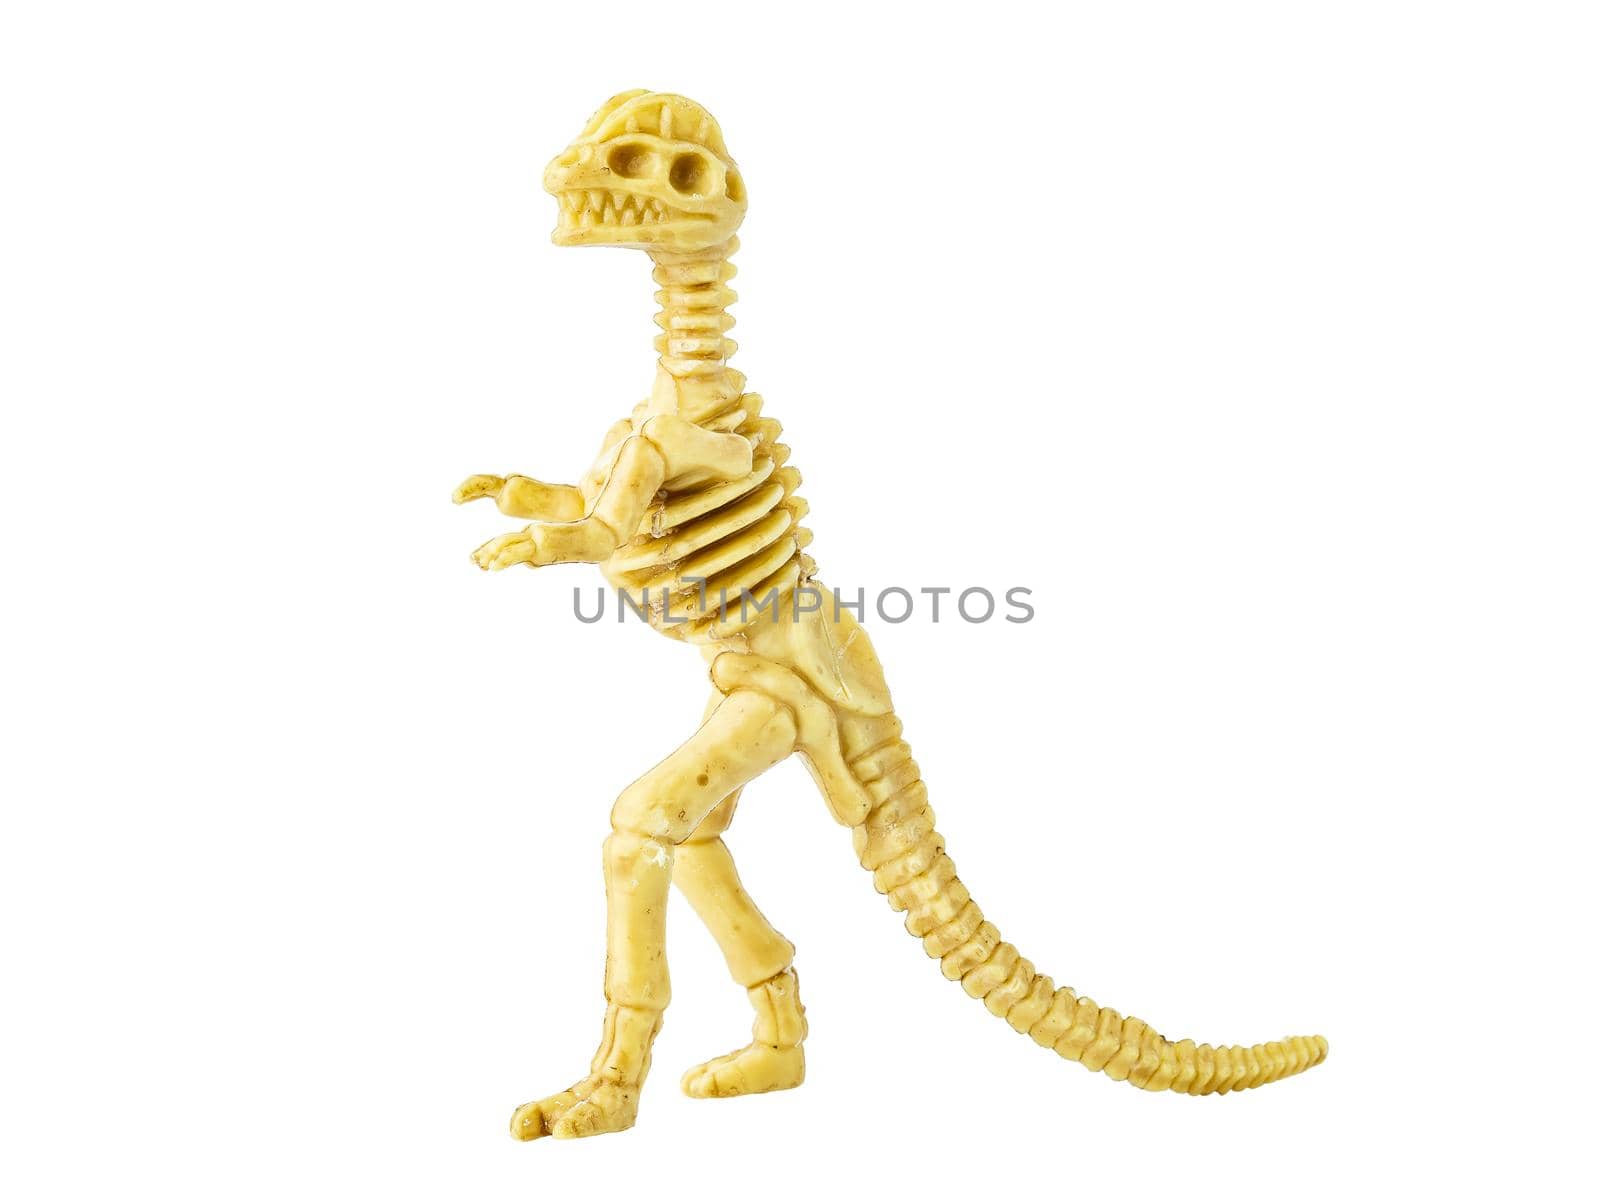 Dinosaur skeleton model toy isolated on white  by Syvanych